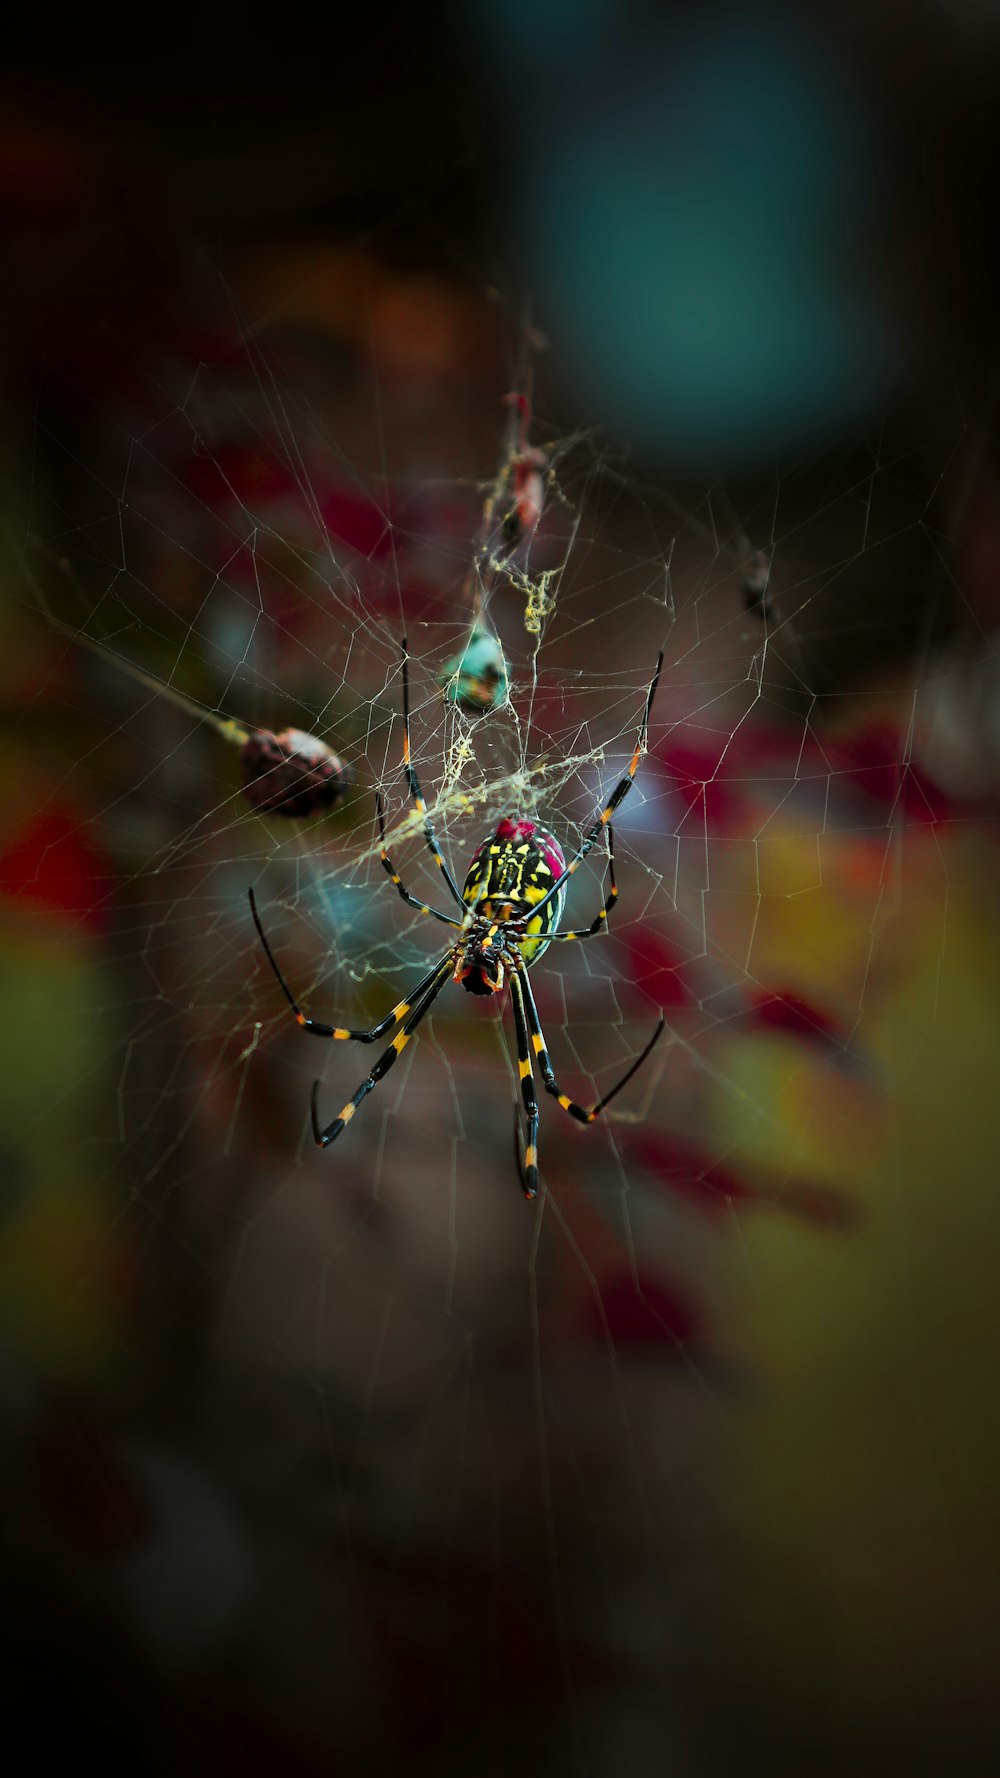 green and yellow spider on web in close up photography during daytime